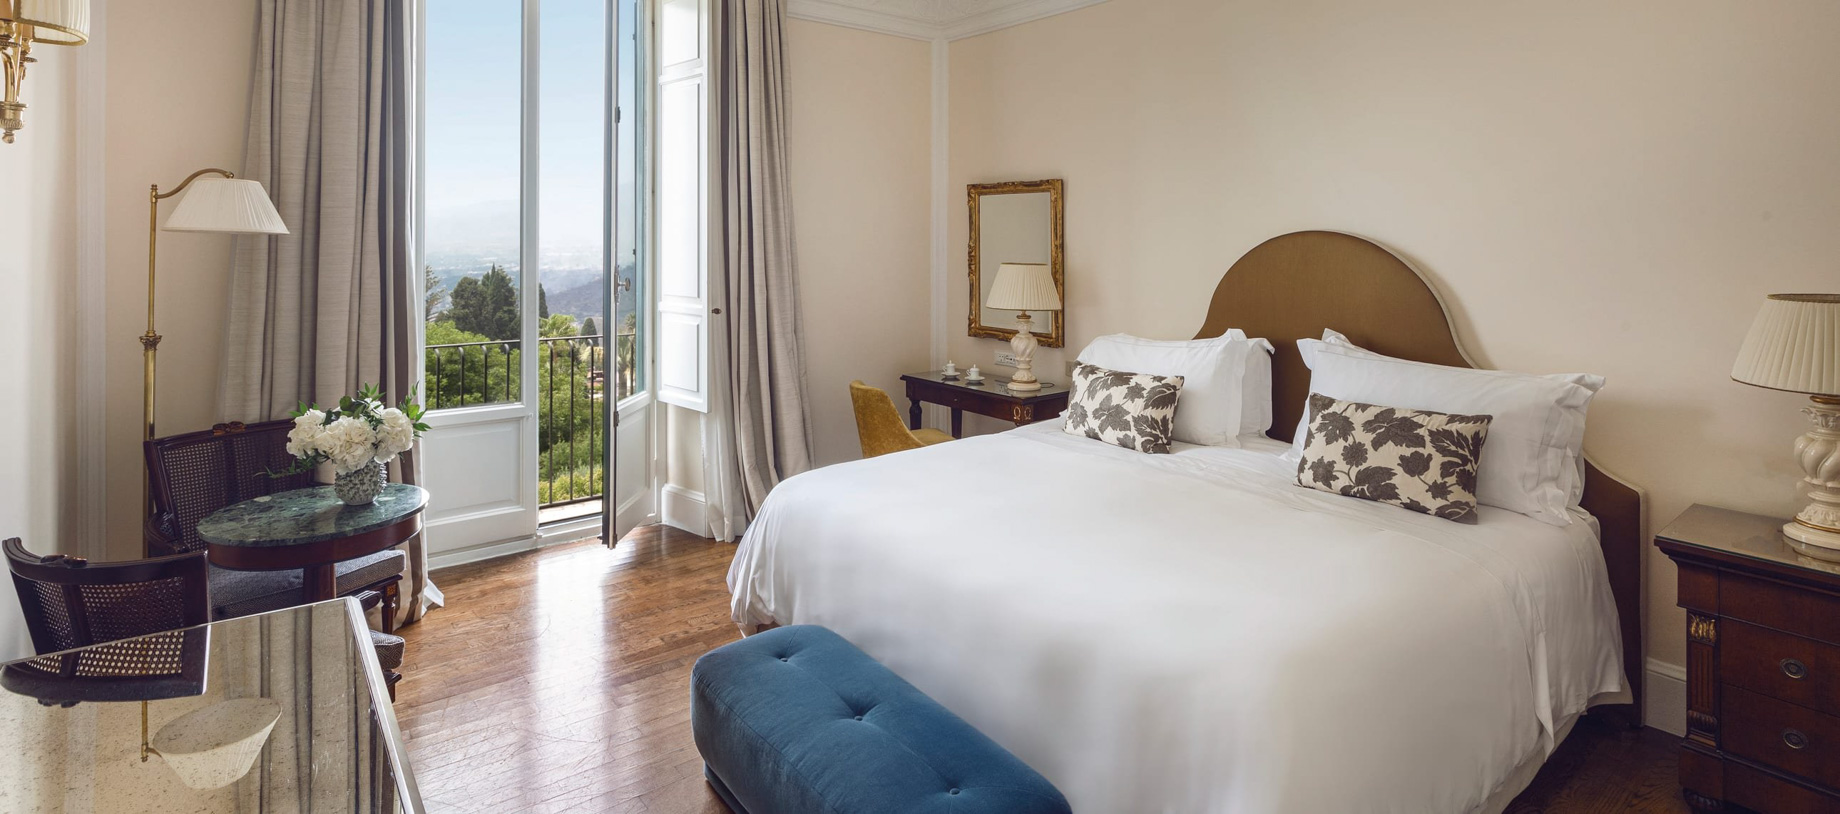 111 – Grand Hotel Timeo, A Belmond Hotel – Taormina, Italy – Deluxe Room